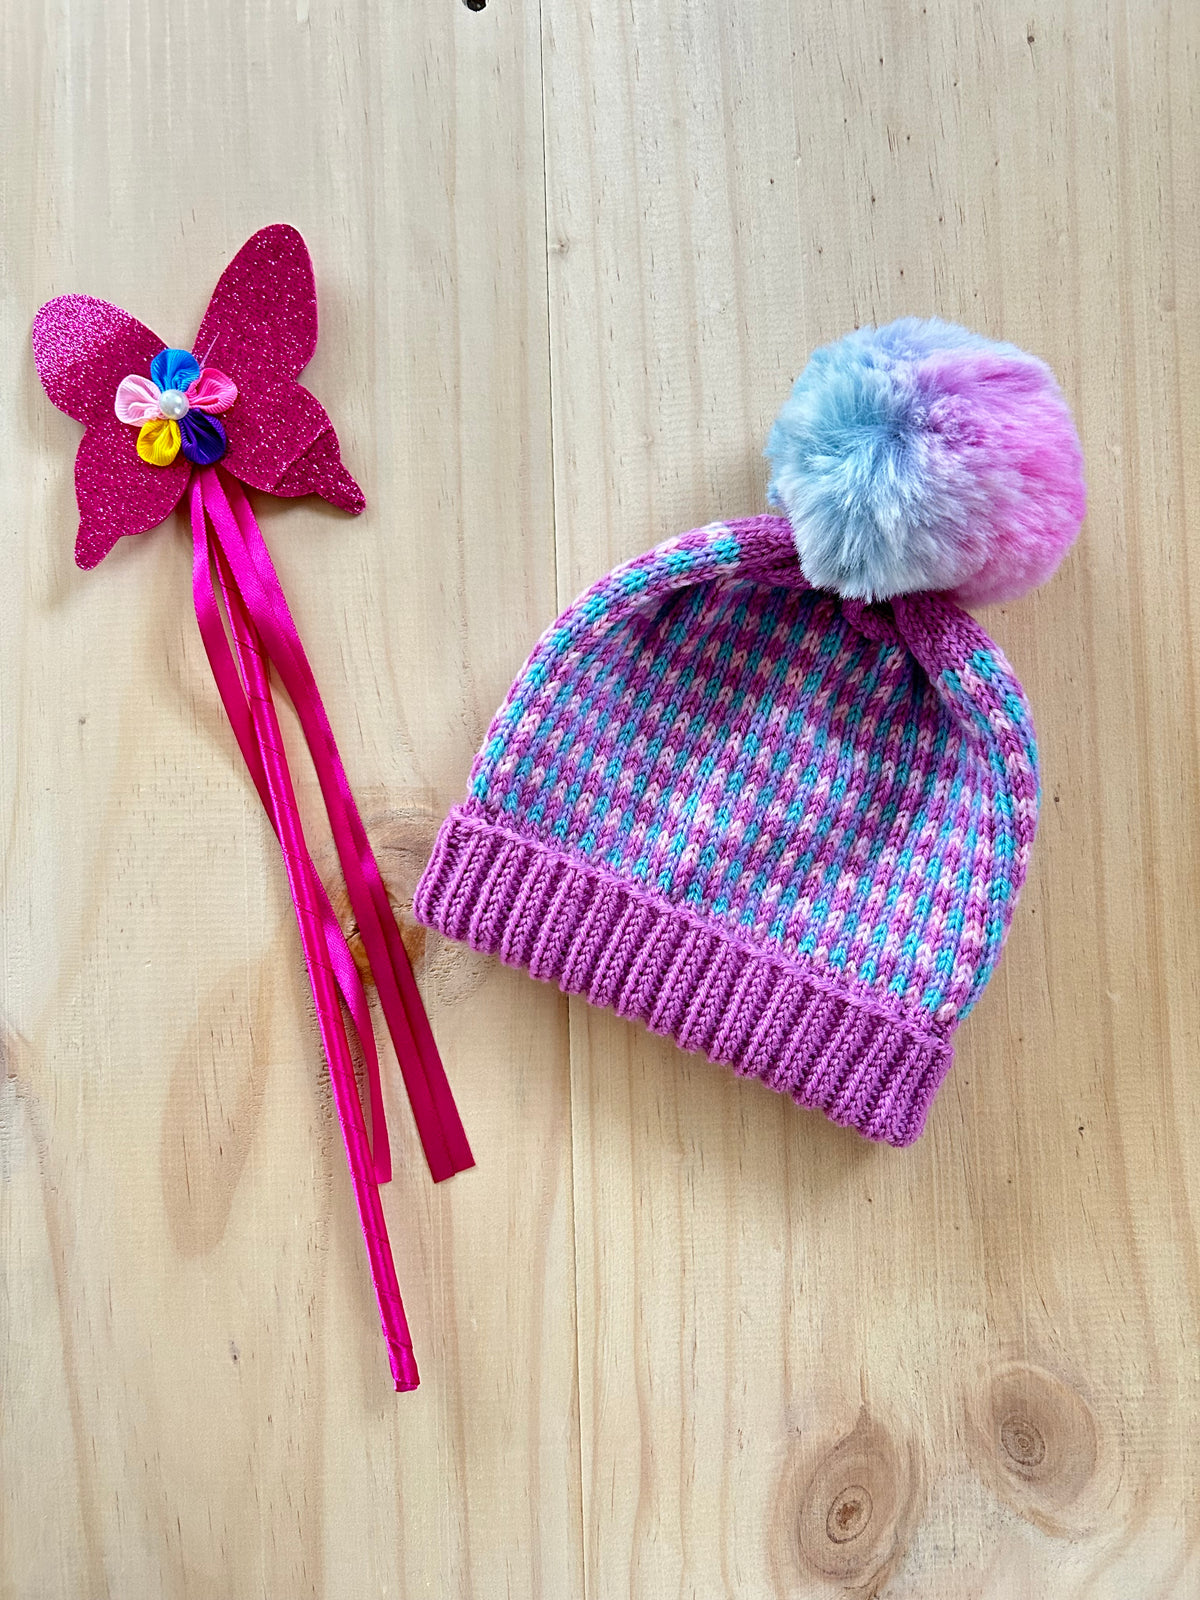 BEANIES FOR TINY TOTS - 6 MONTHS - 2 YEARS